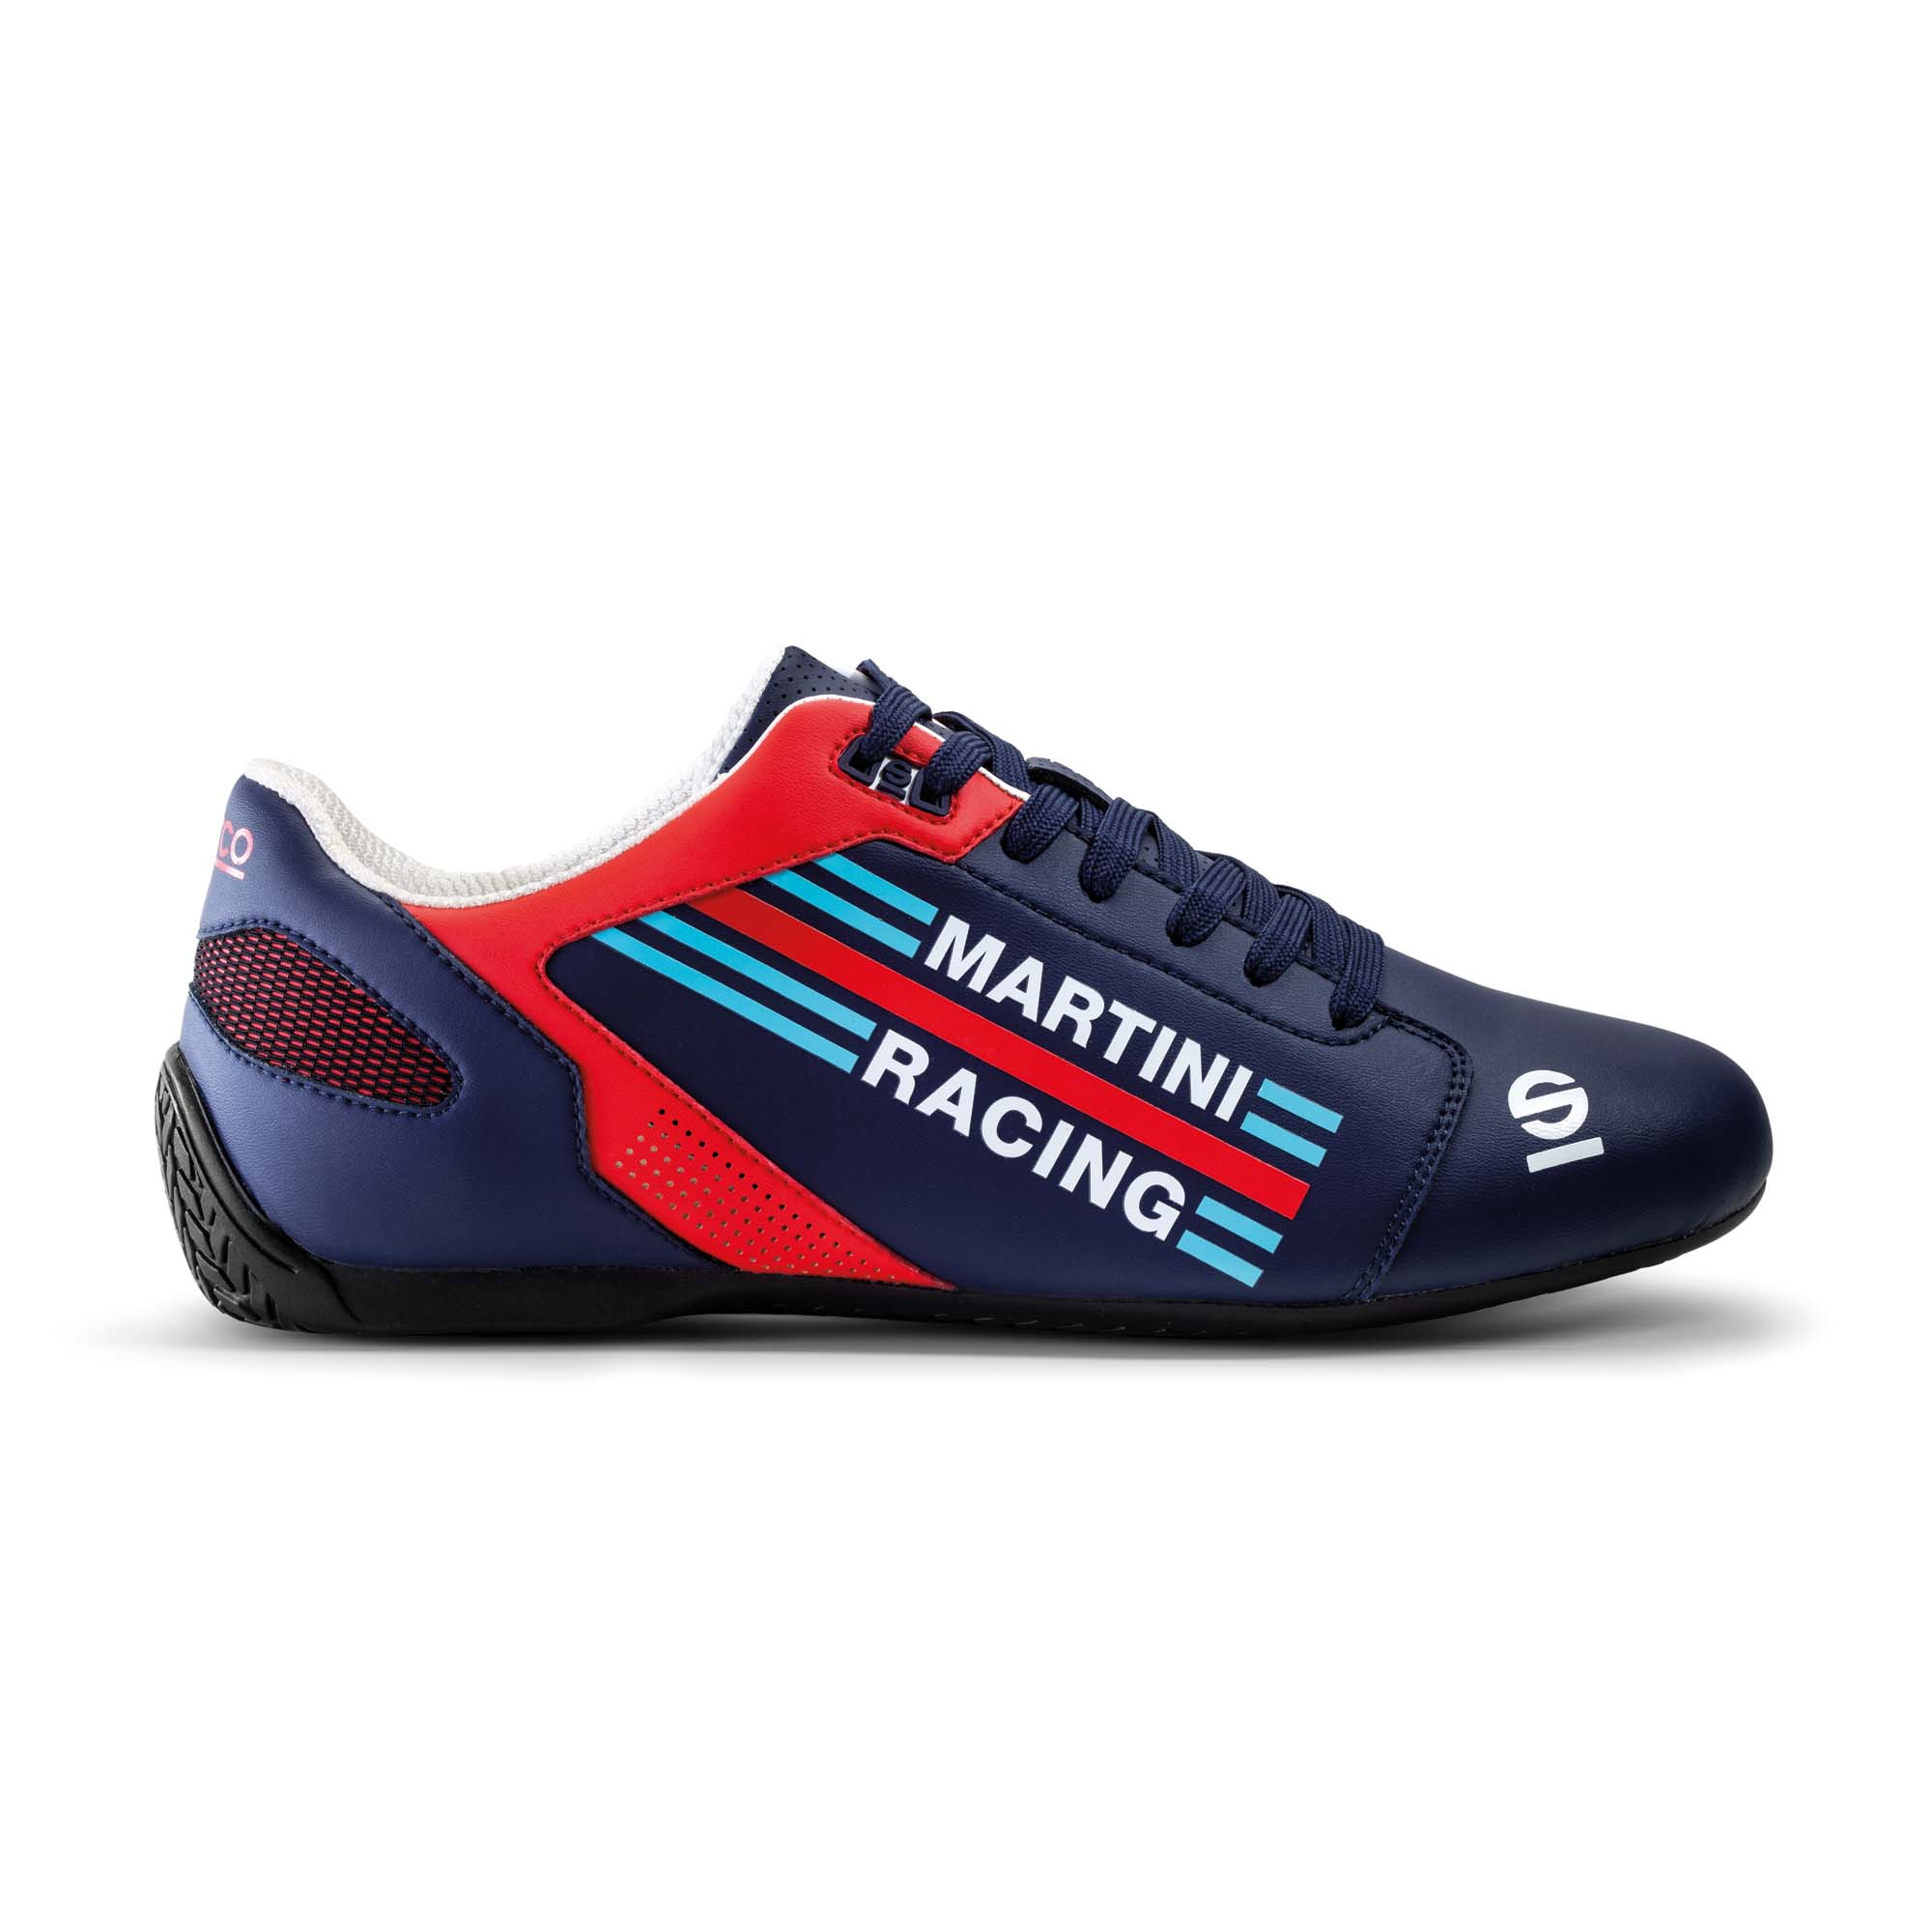 Sparco Martini SL-17 Shoes